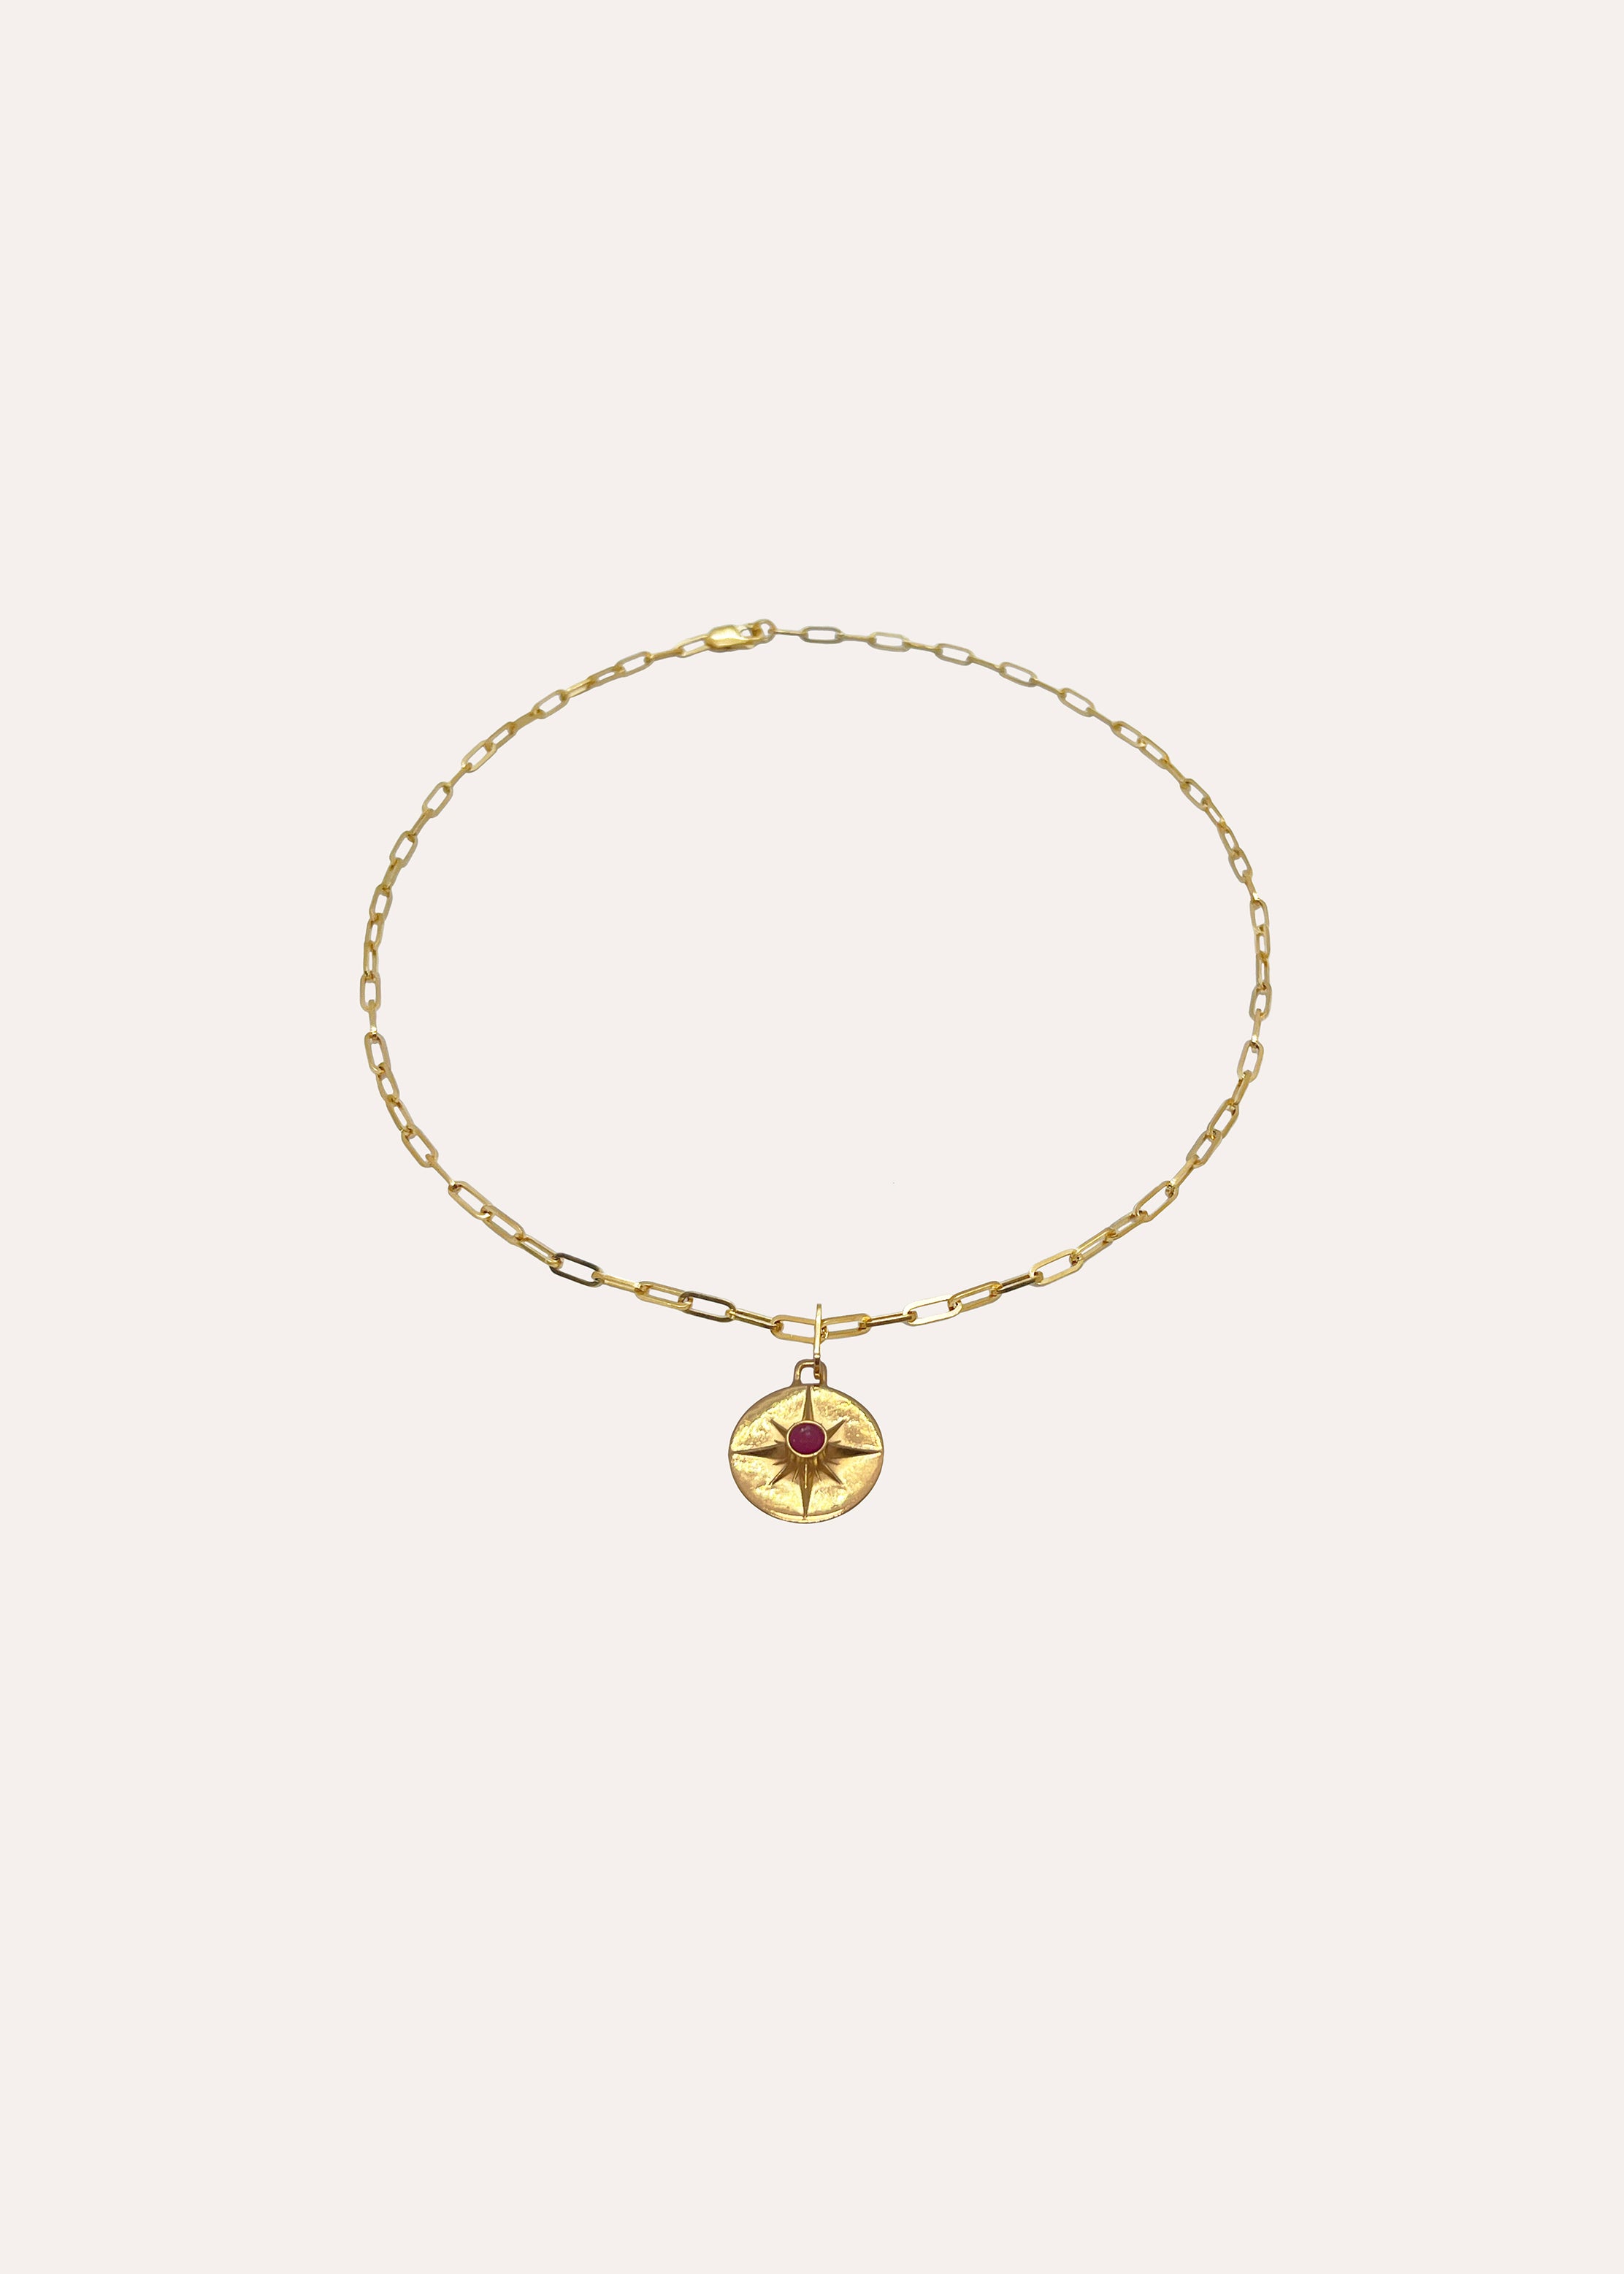 ASTRID star gold chain necklace